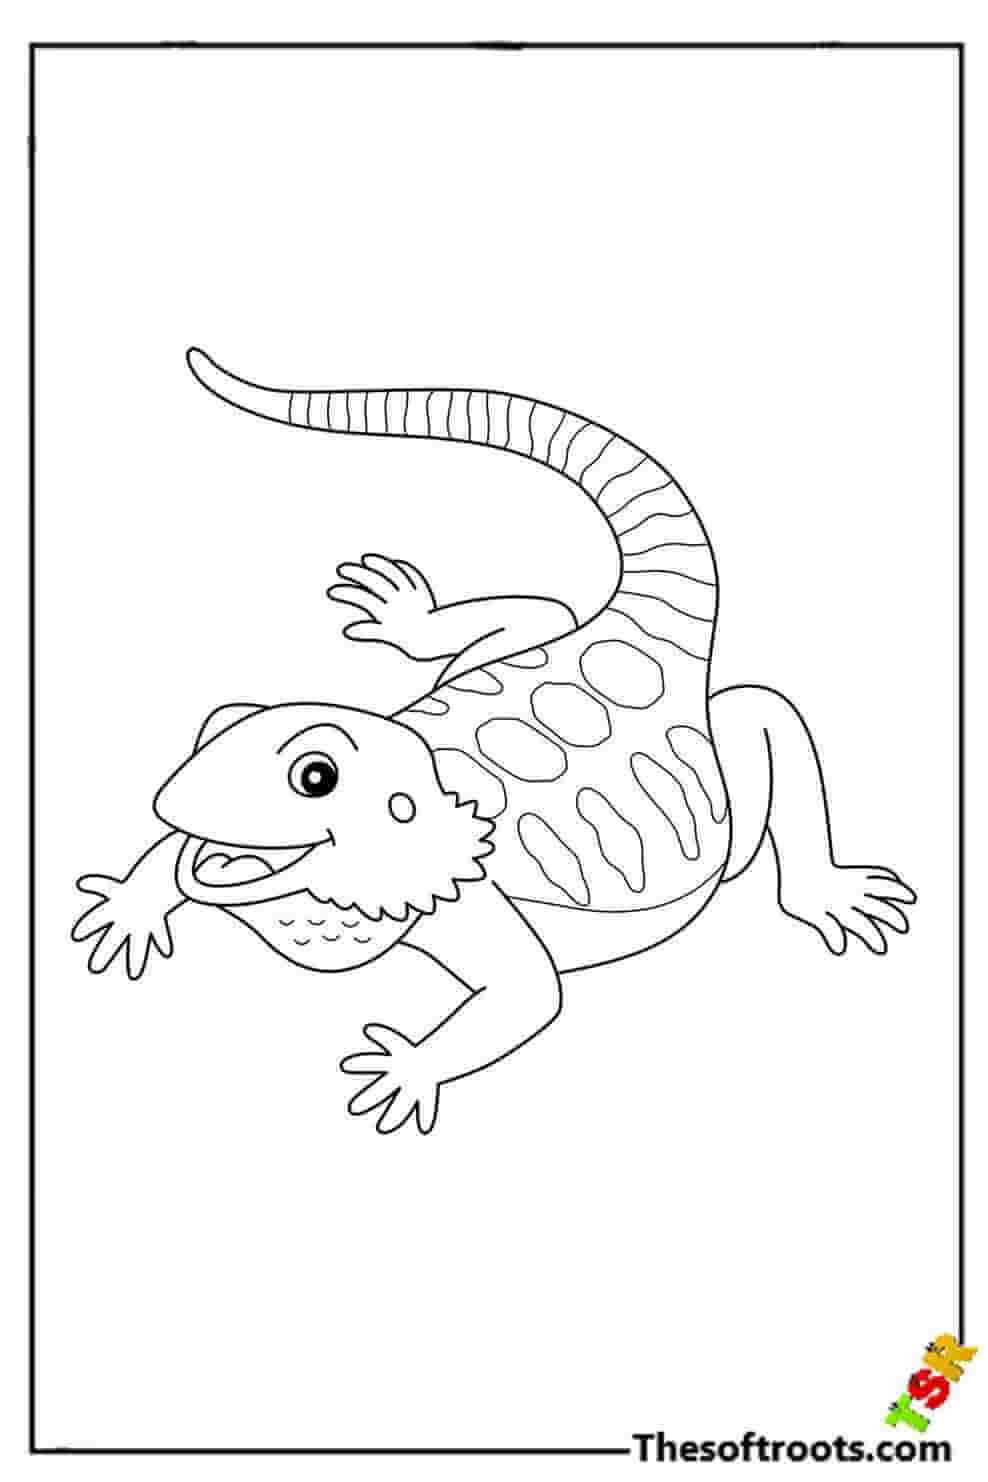 Gecko lizard coloring pages